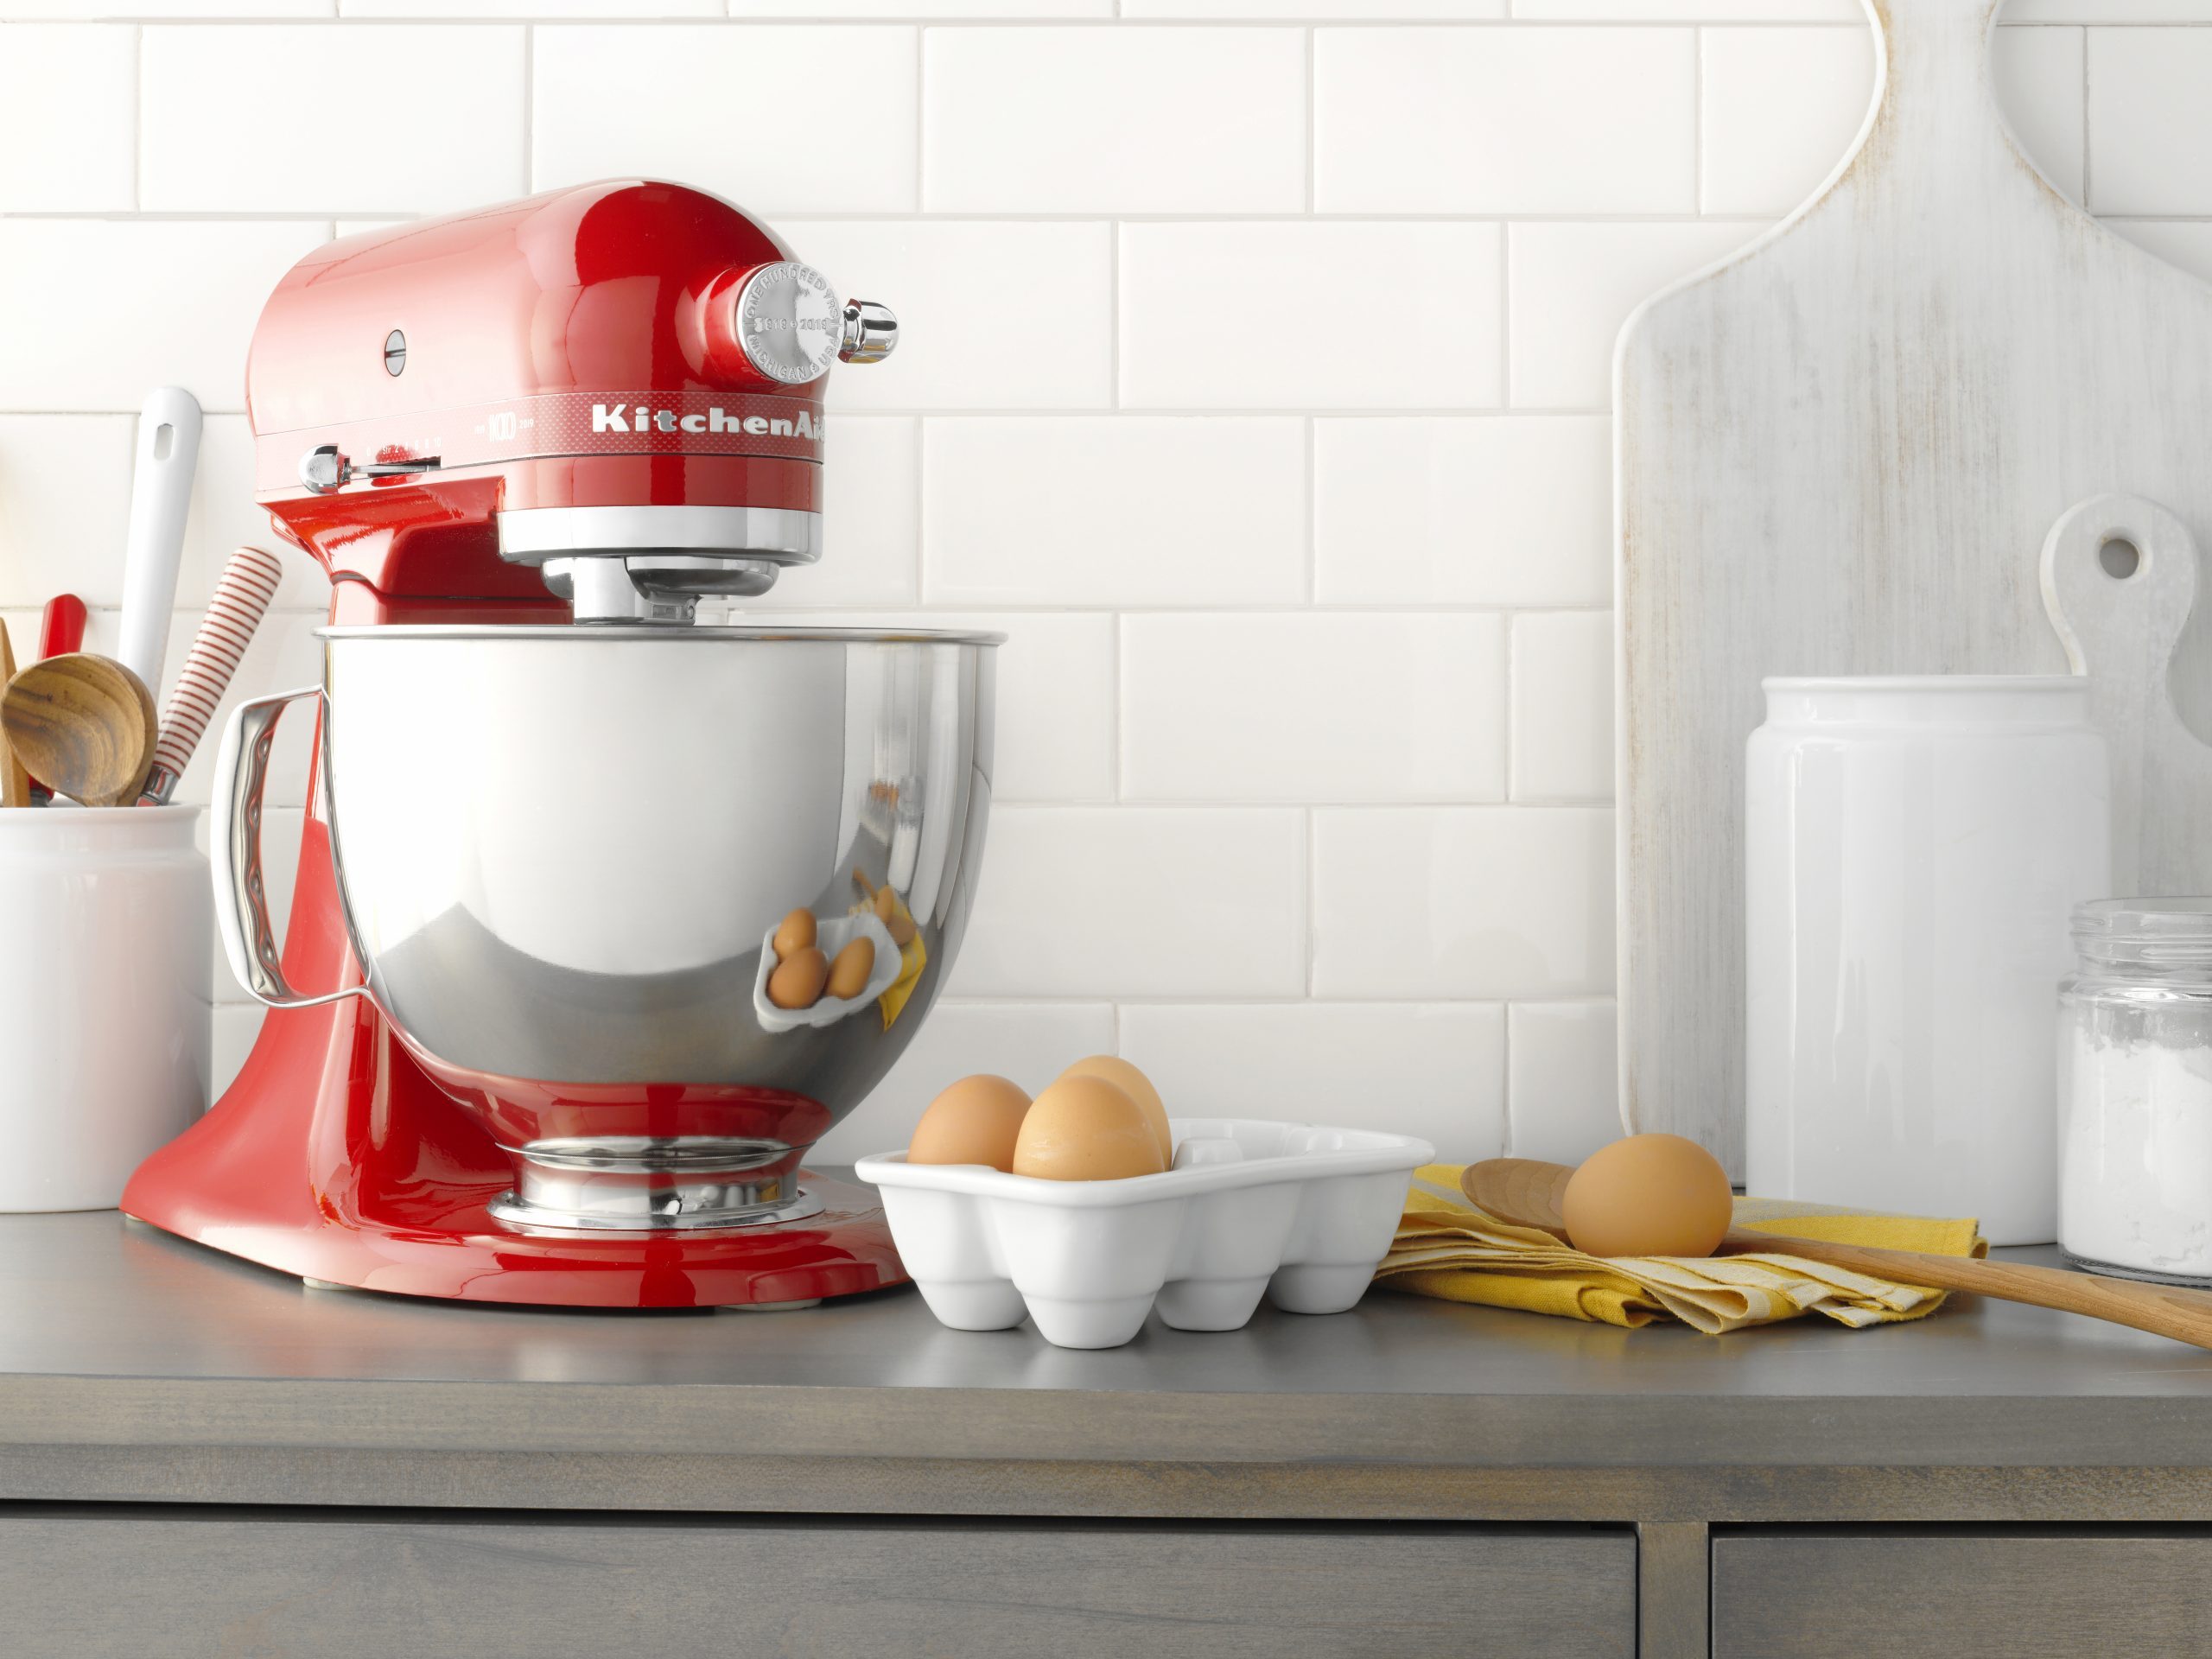 The 7 best accessories you can buy for a KitchenAid stand mixer